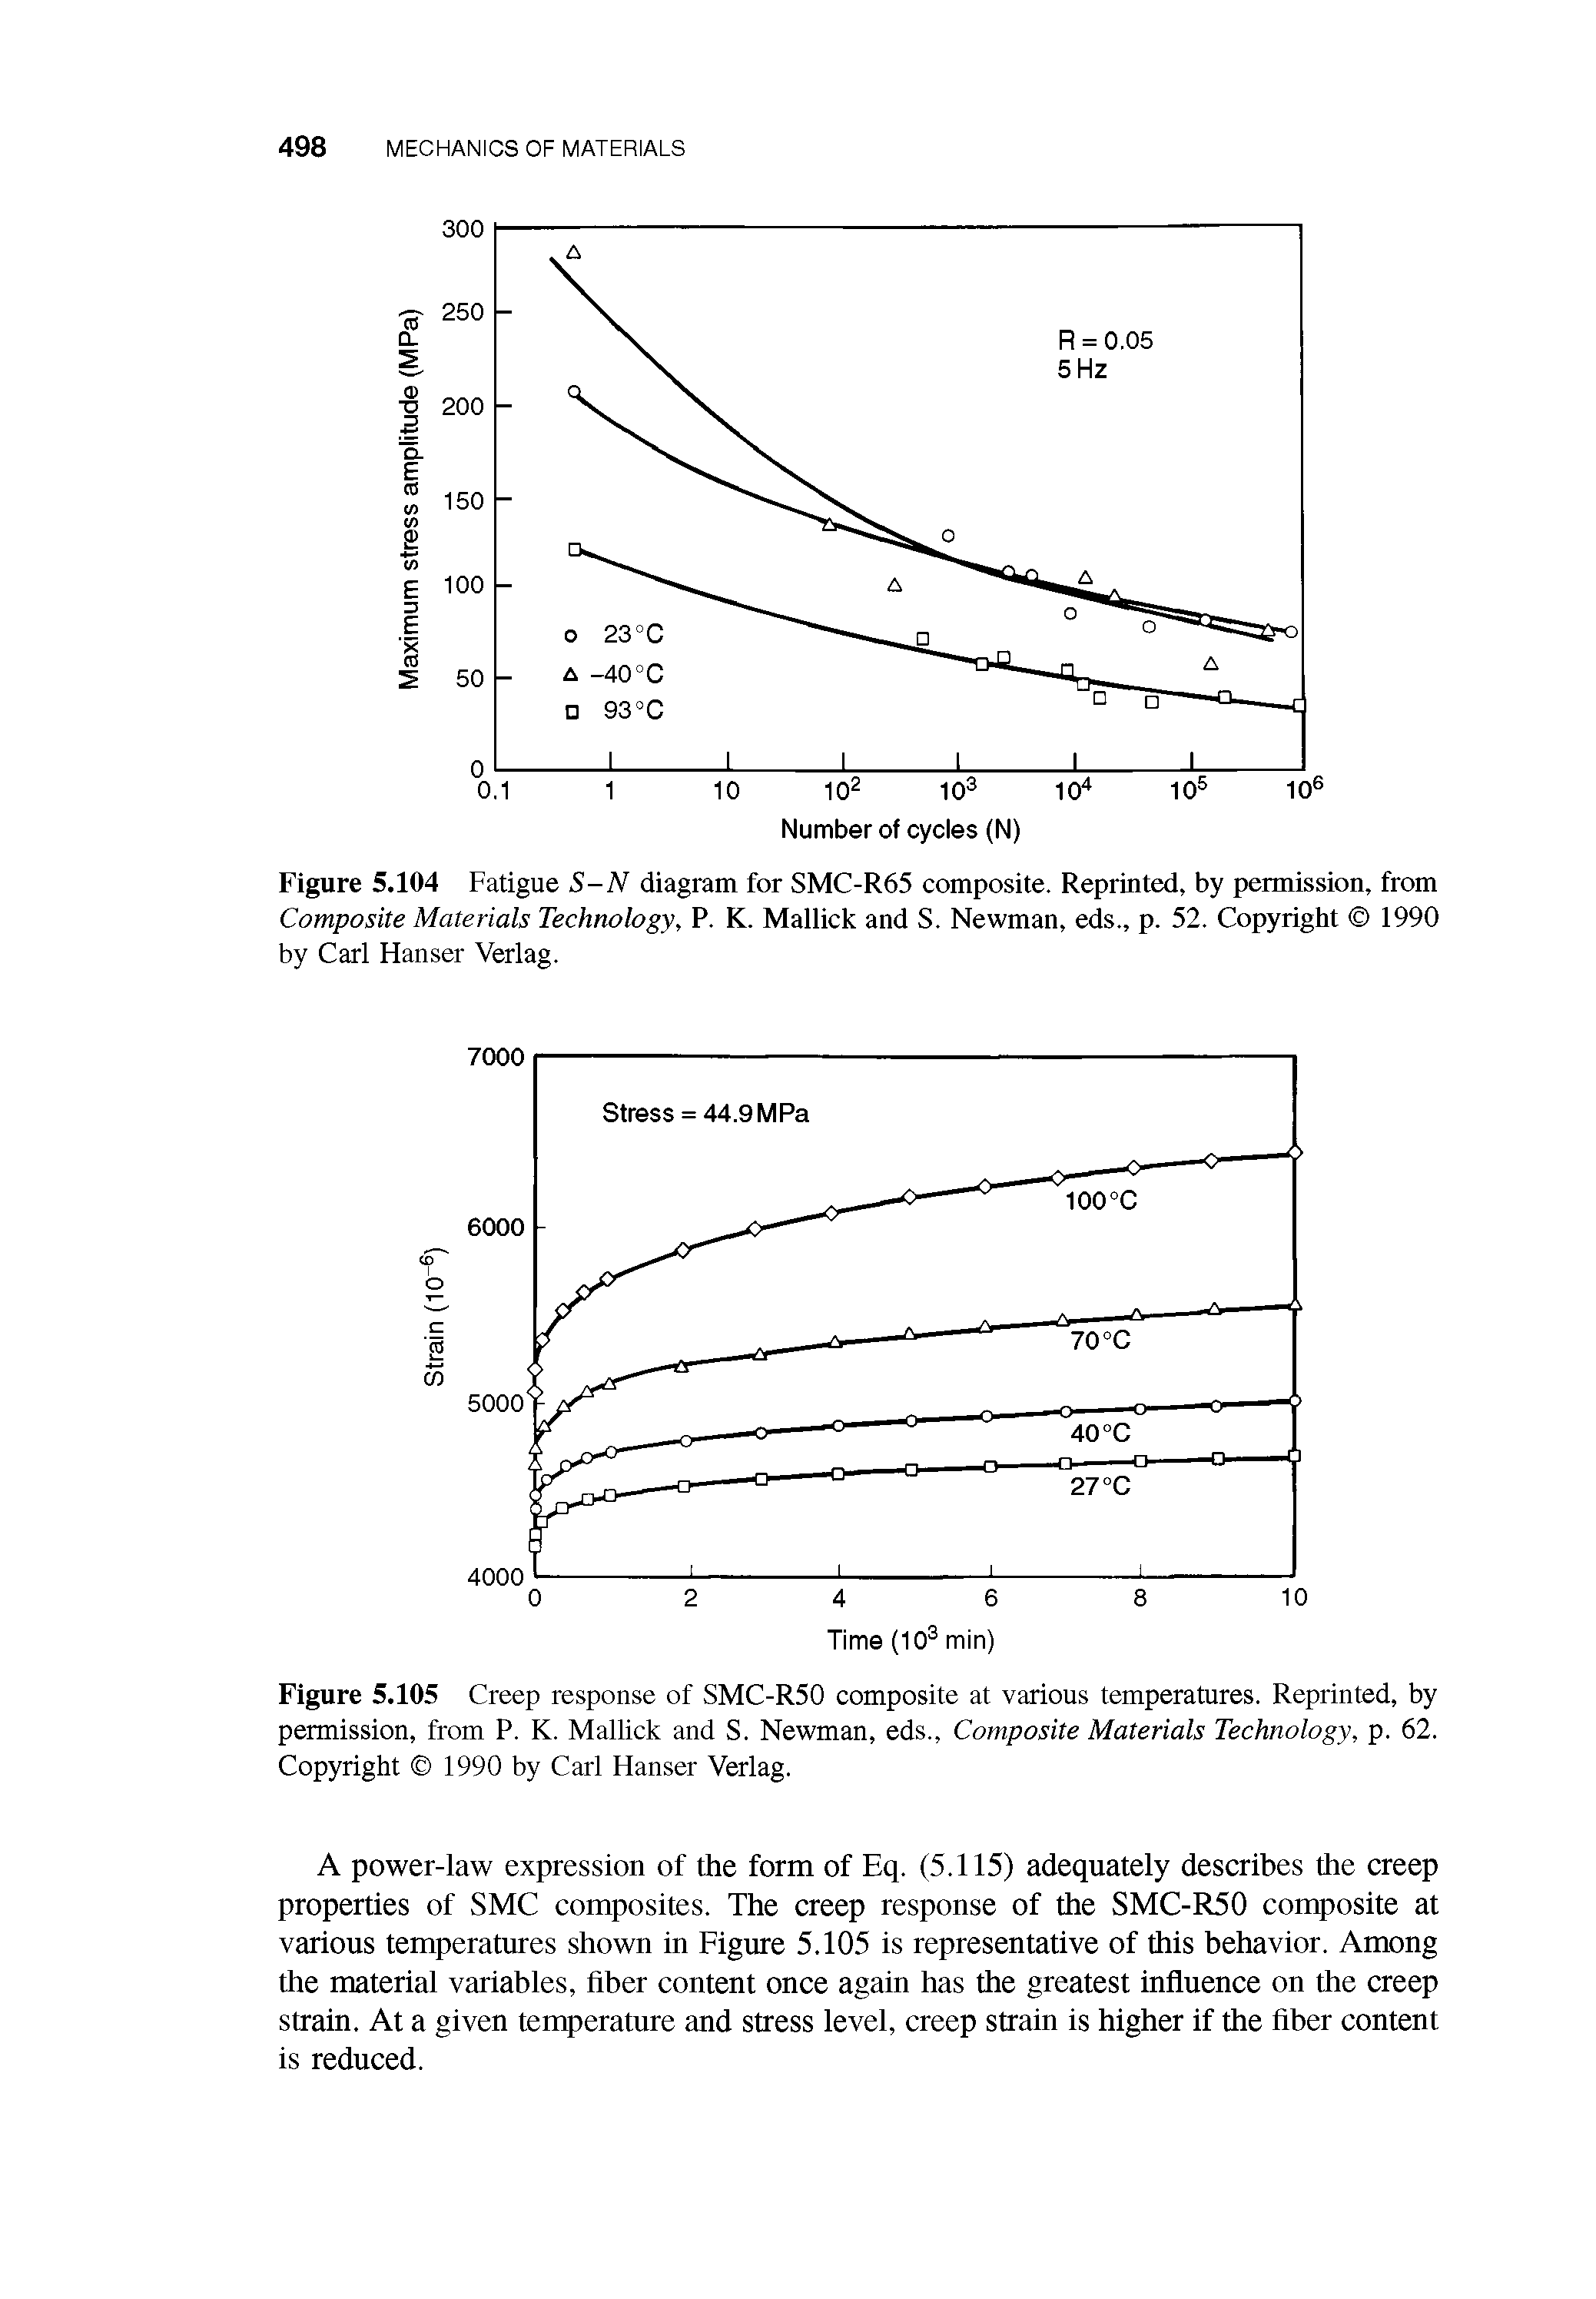 Figure 5.105 Creep response of SMC-R50 composite at various temperatures. Reprinted, by permission, from P. K. Mallick and S. Newman, eds.. Composite Materials Technology, p. 62. Copyright 1990 by Carl Hanser Verlag.